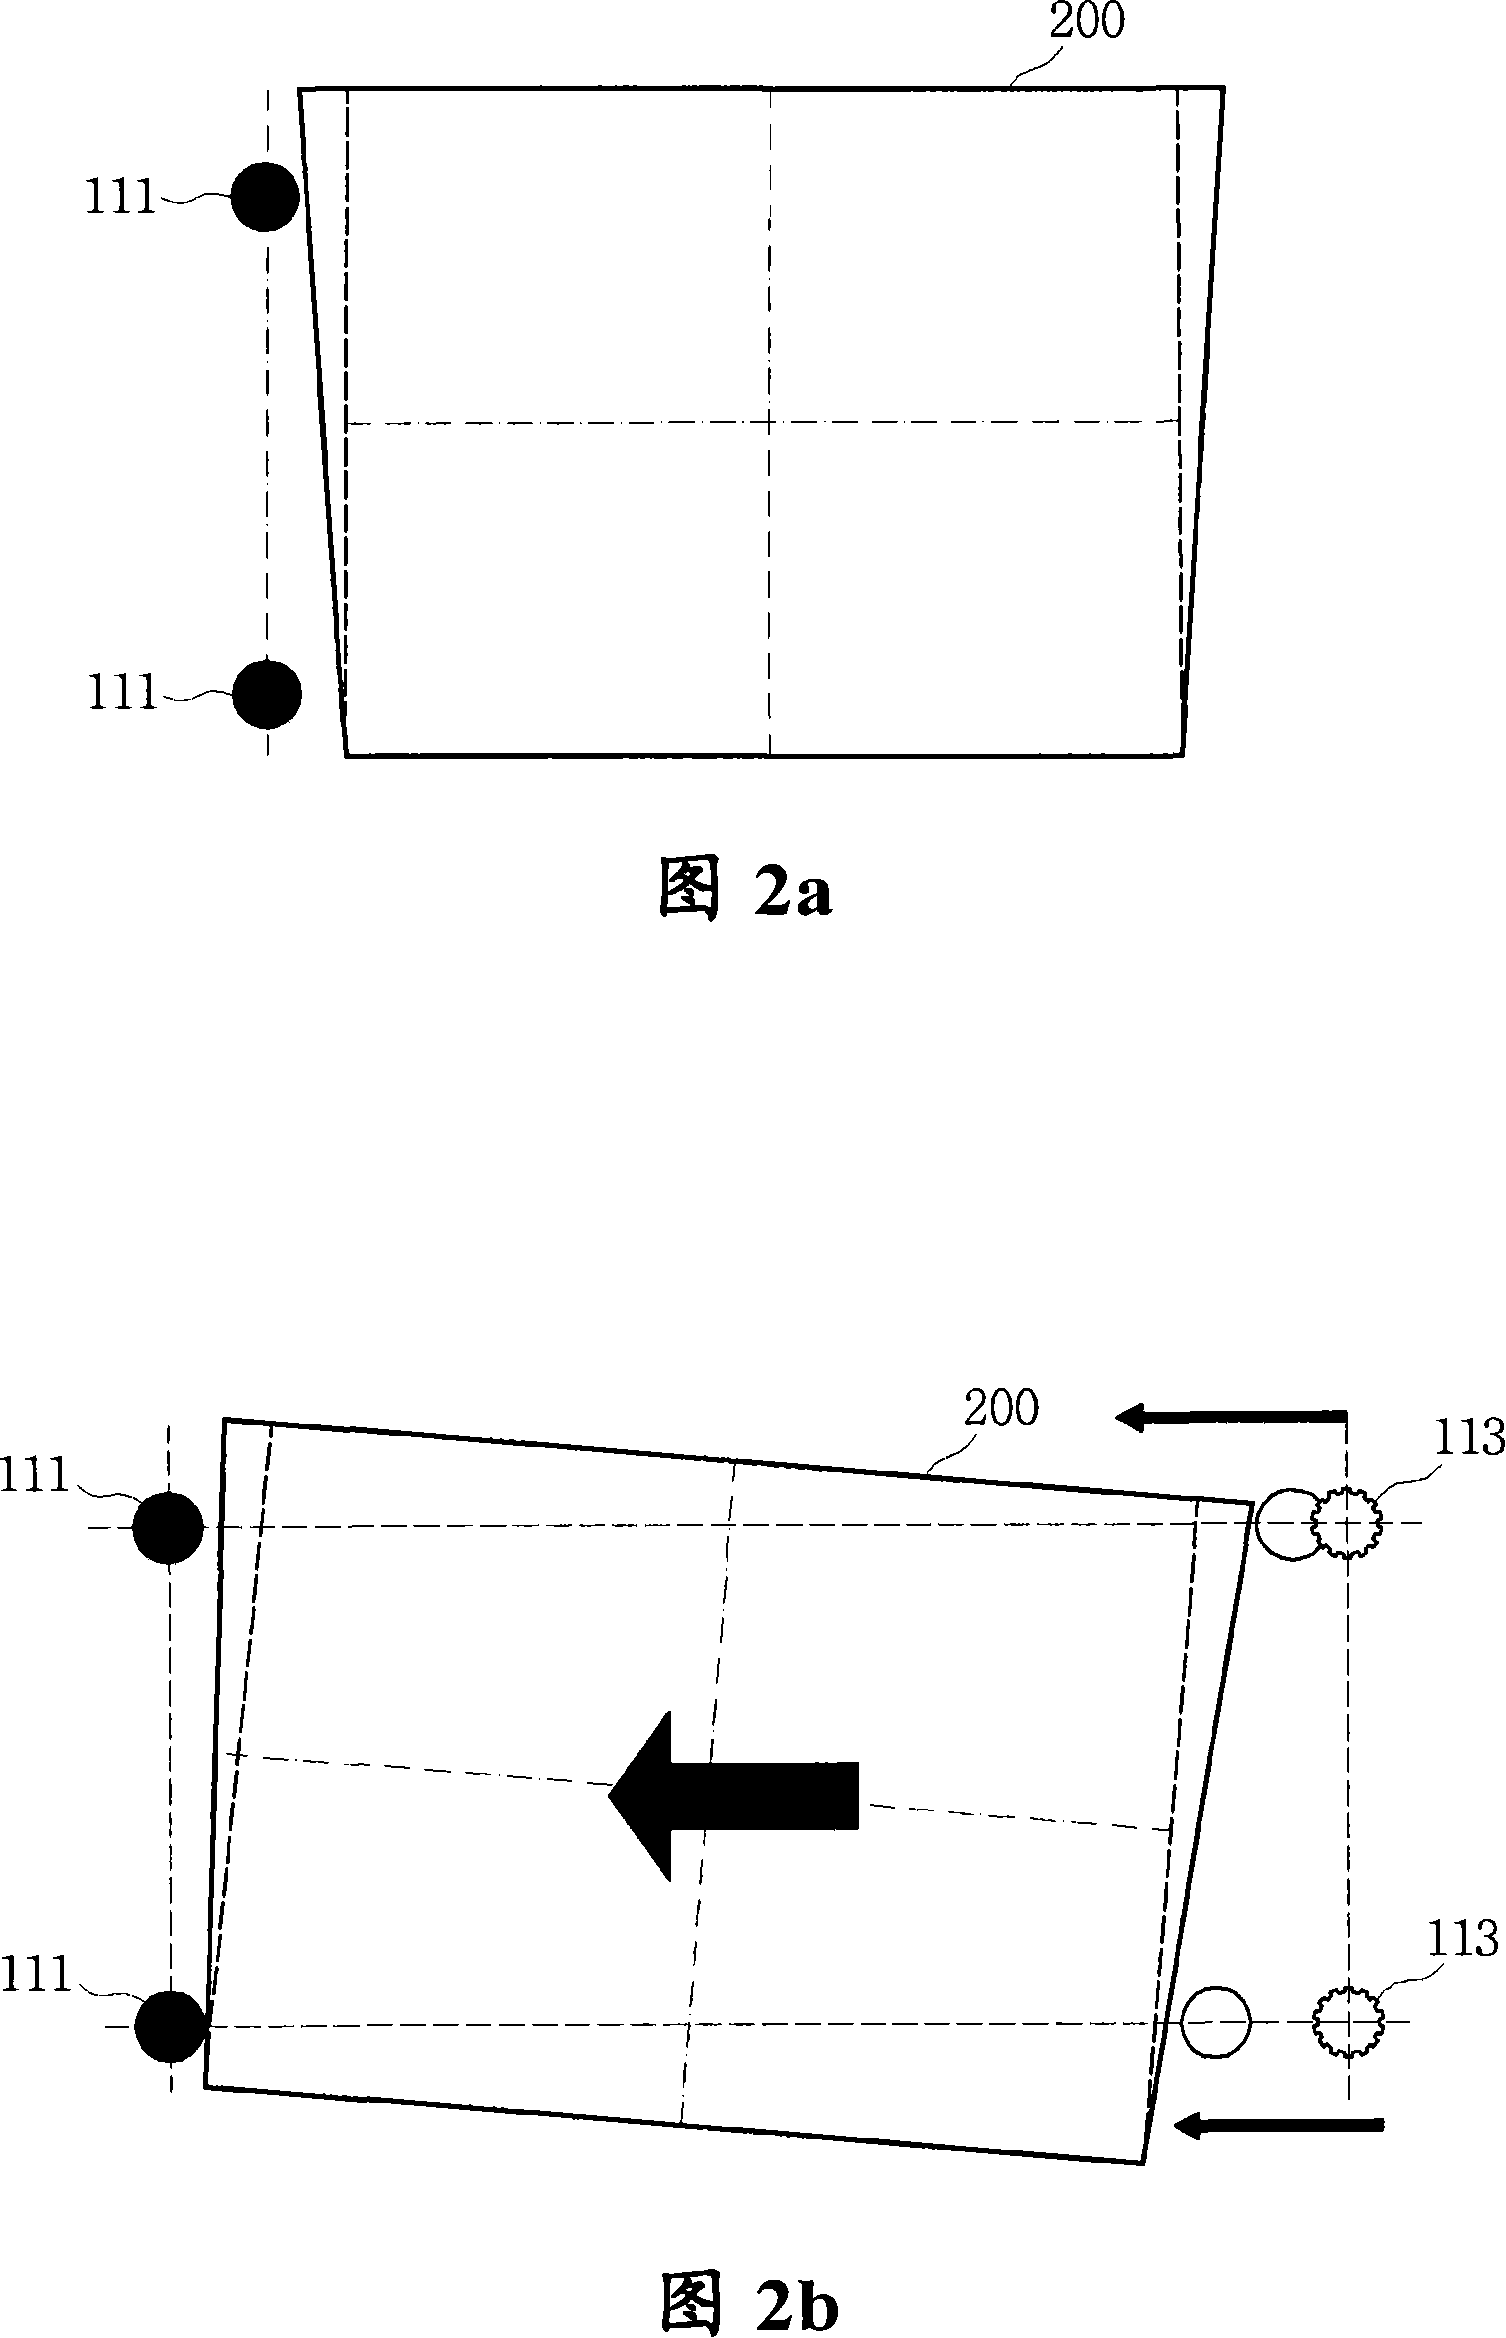 Glass centering apparatus for flat pannel display